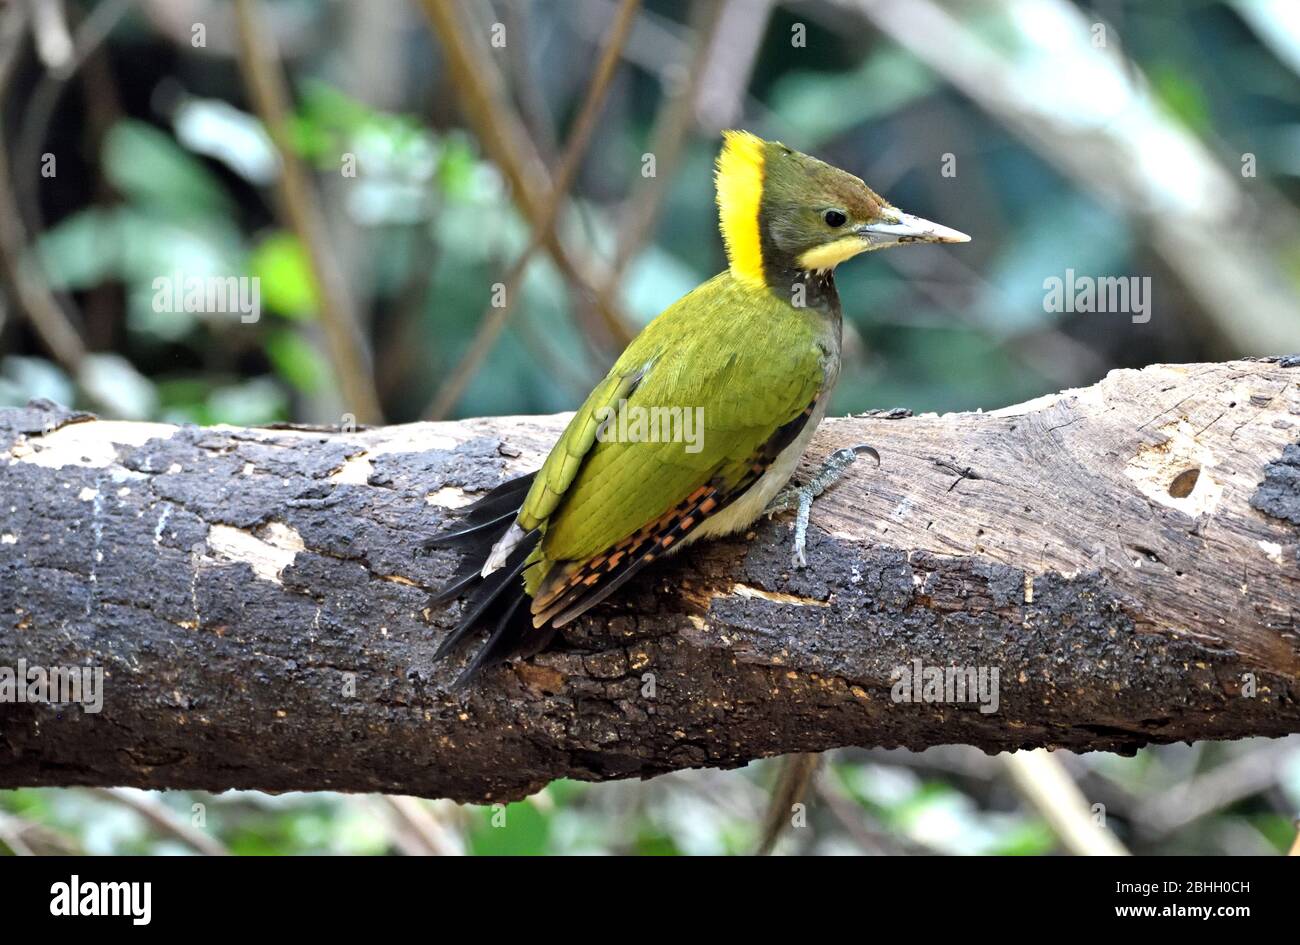 A male Greater Yellownape (Chrysophlegma flavinucha) perching on small tree trunk in the forest in Western Thailand Stock Photo